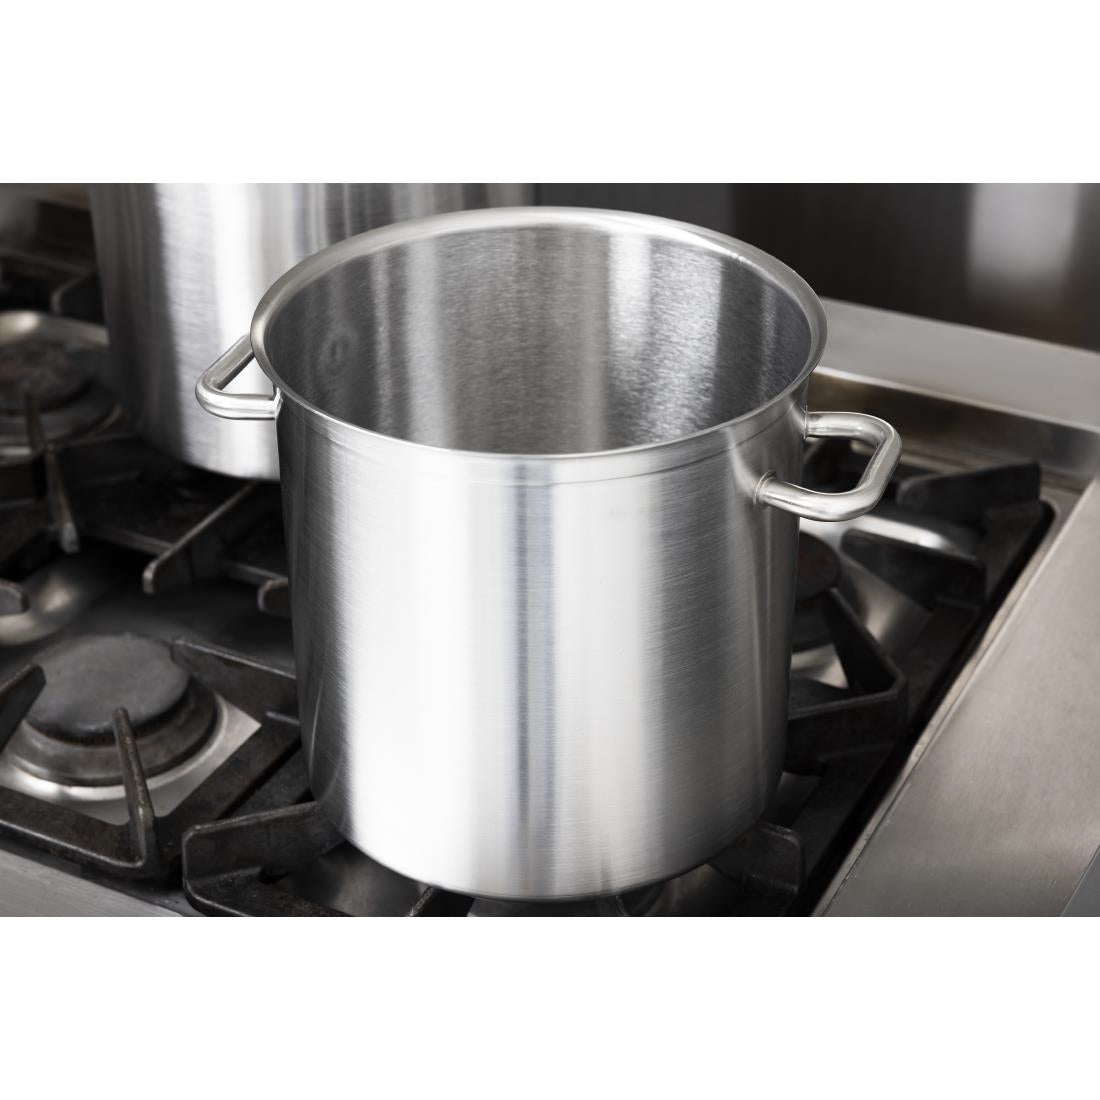 Bourgeat Excellence Stock Pot 10.8Ltr JD Catering Equipment Solutions Ltd